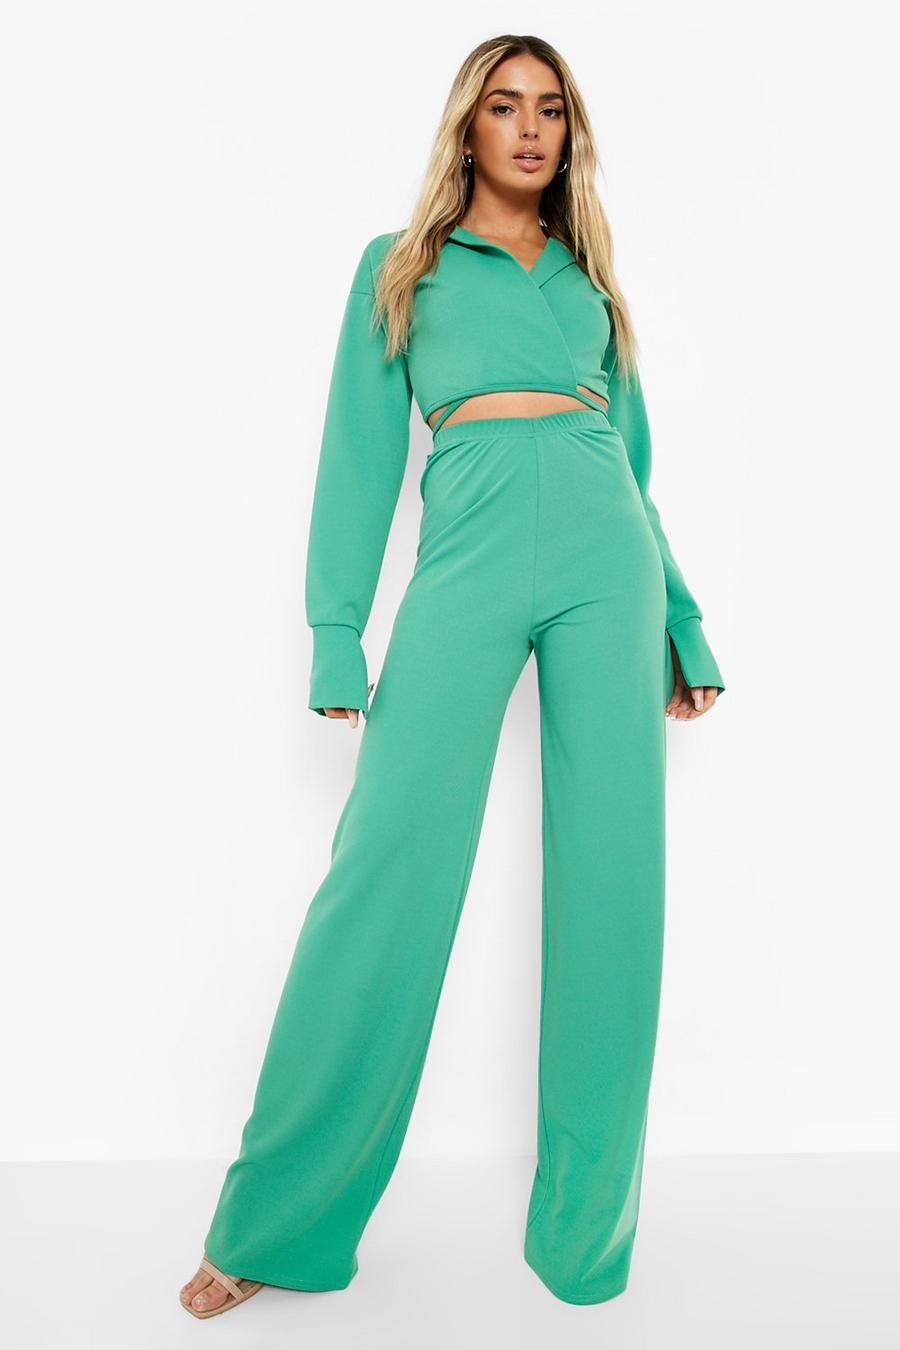 Apple green Tie Waist Cropped Shirt & Wide Leg Pants image number 1